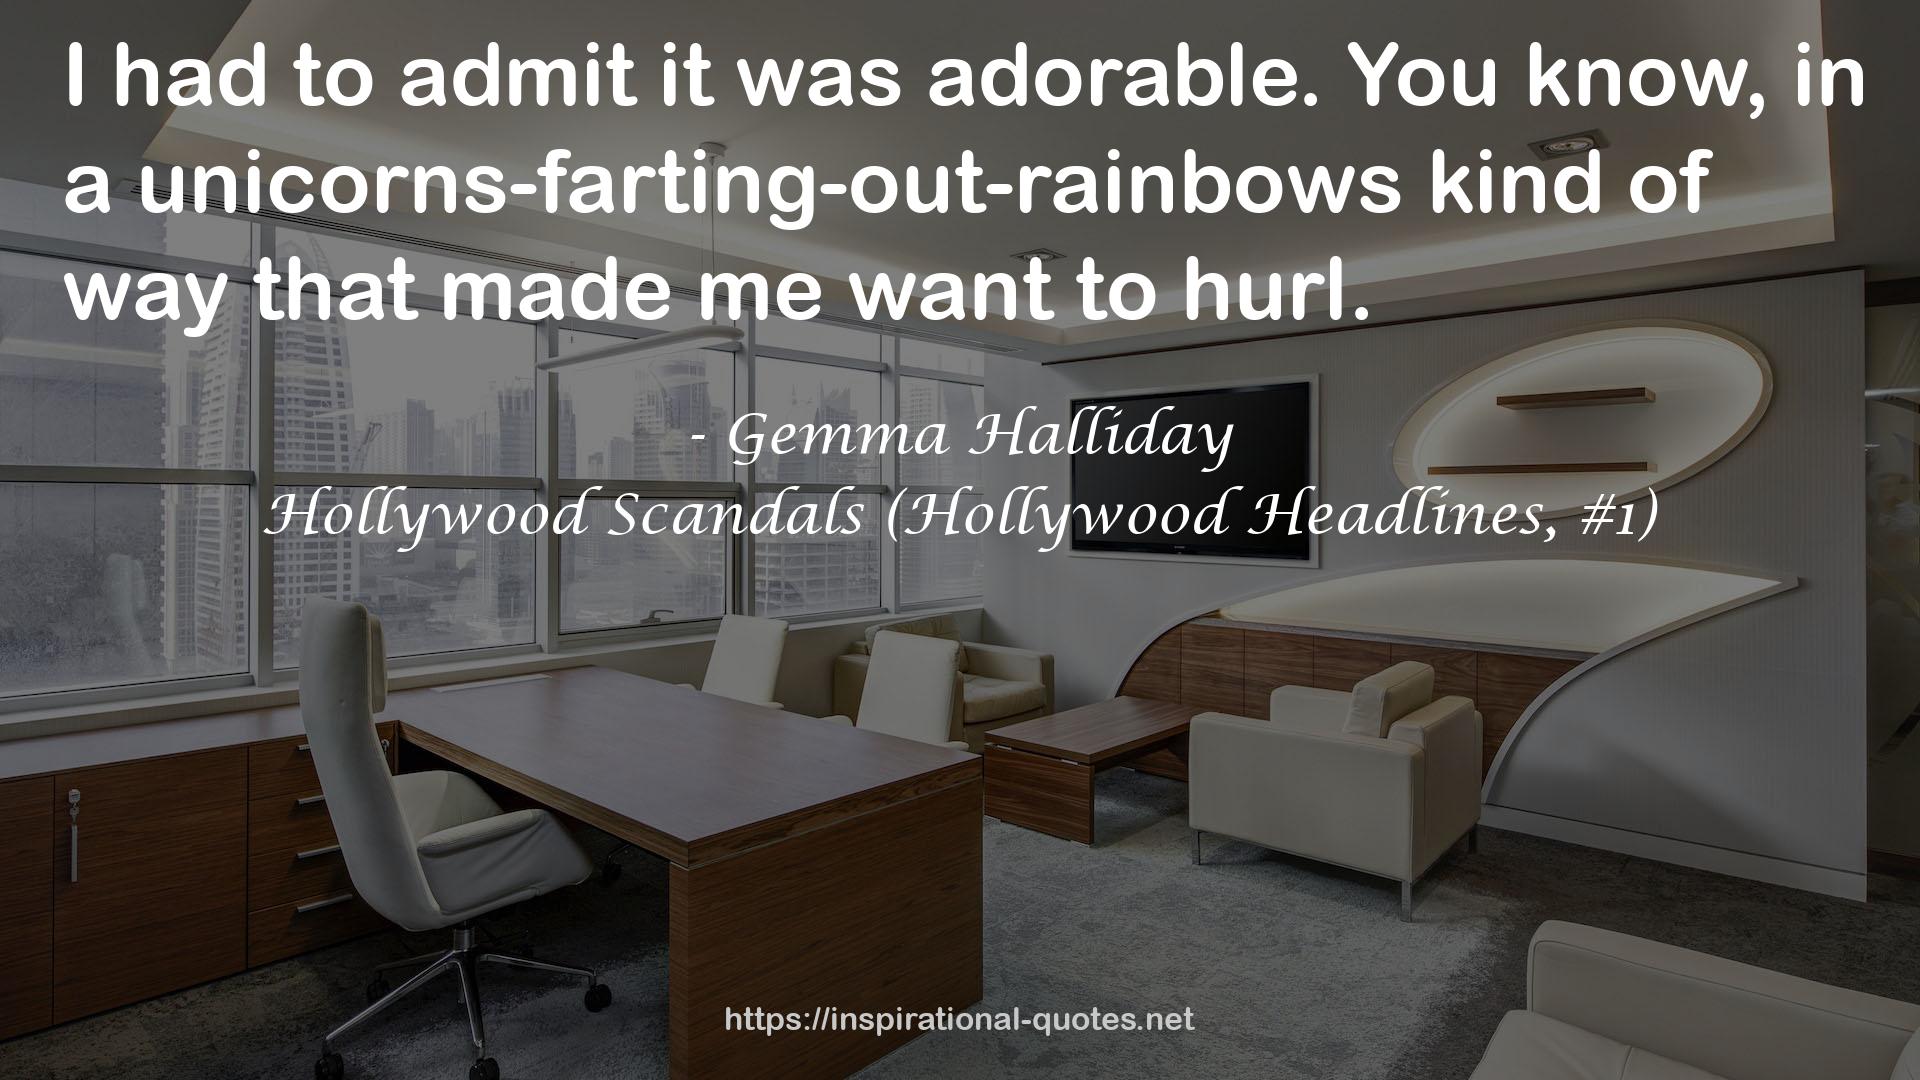 Hollywood Scandals (Hollywood Headlines, #1) QUOTES